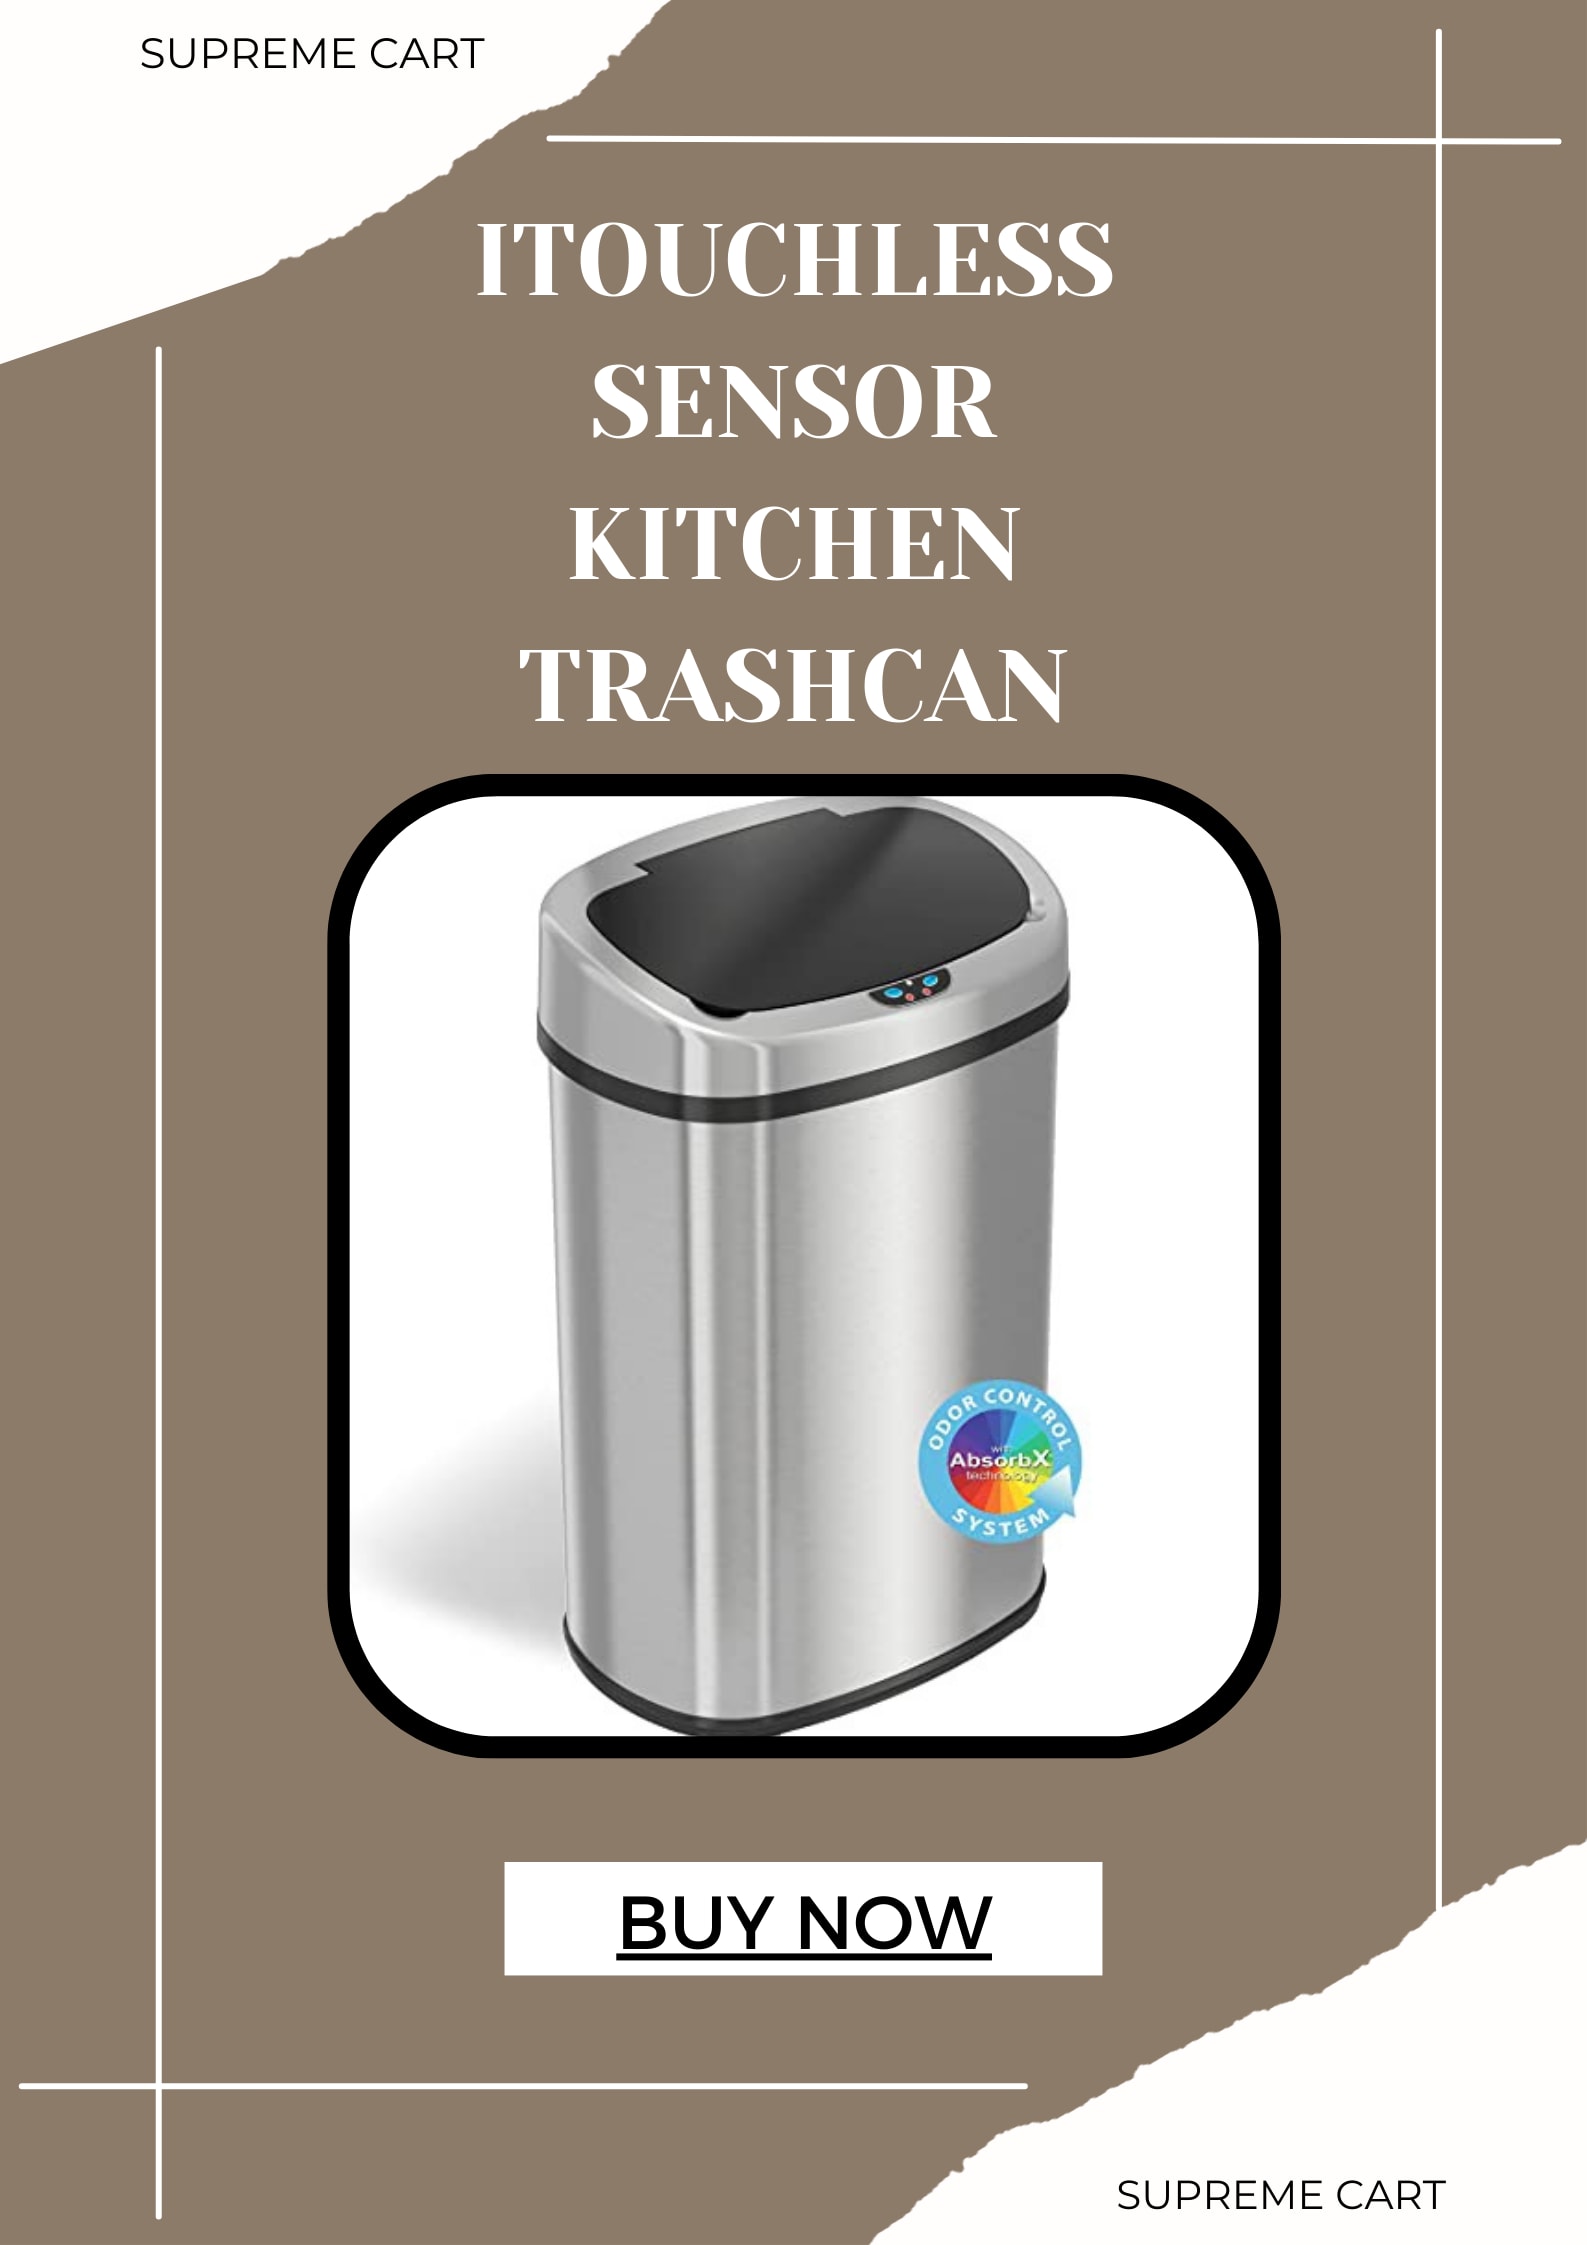 Best Kitchen Trash Can: iTouchless 13 Gallon with Odor-Absorbing Filter